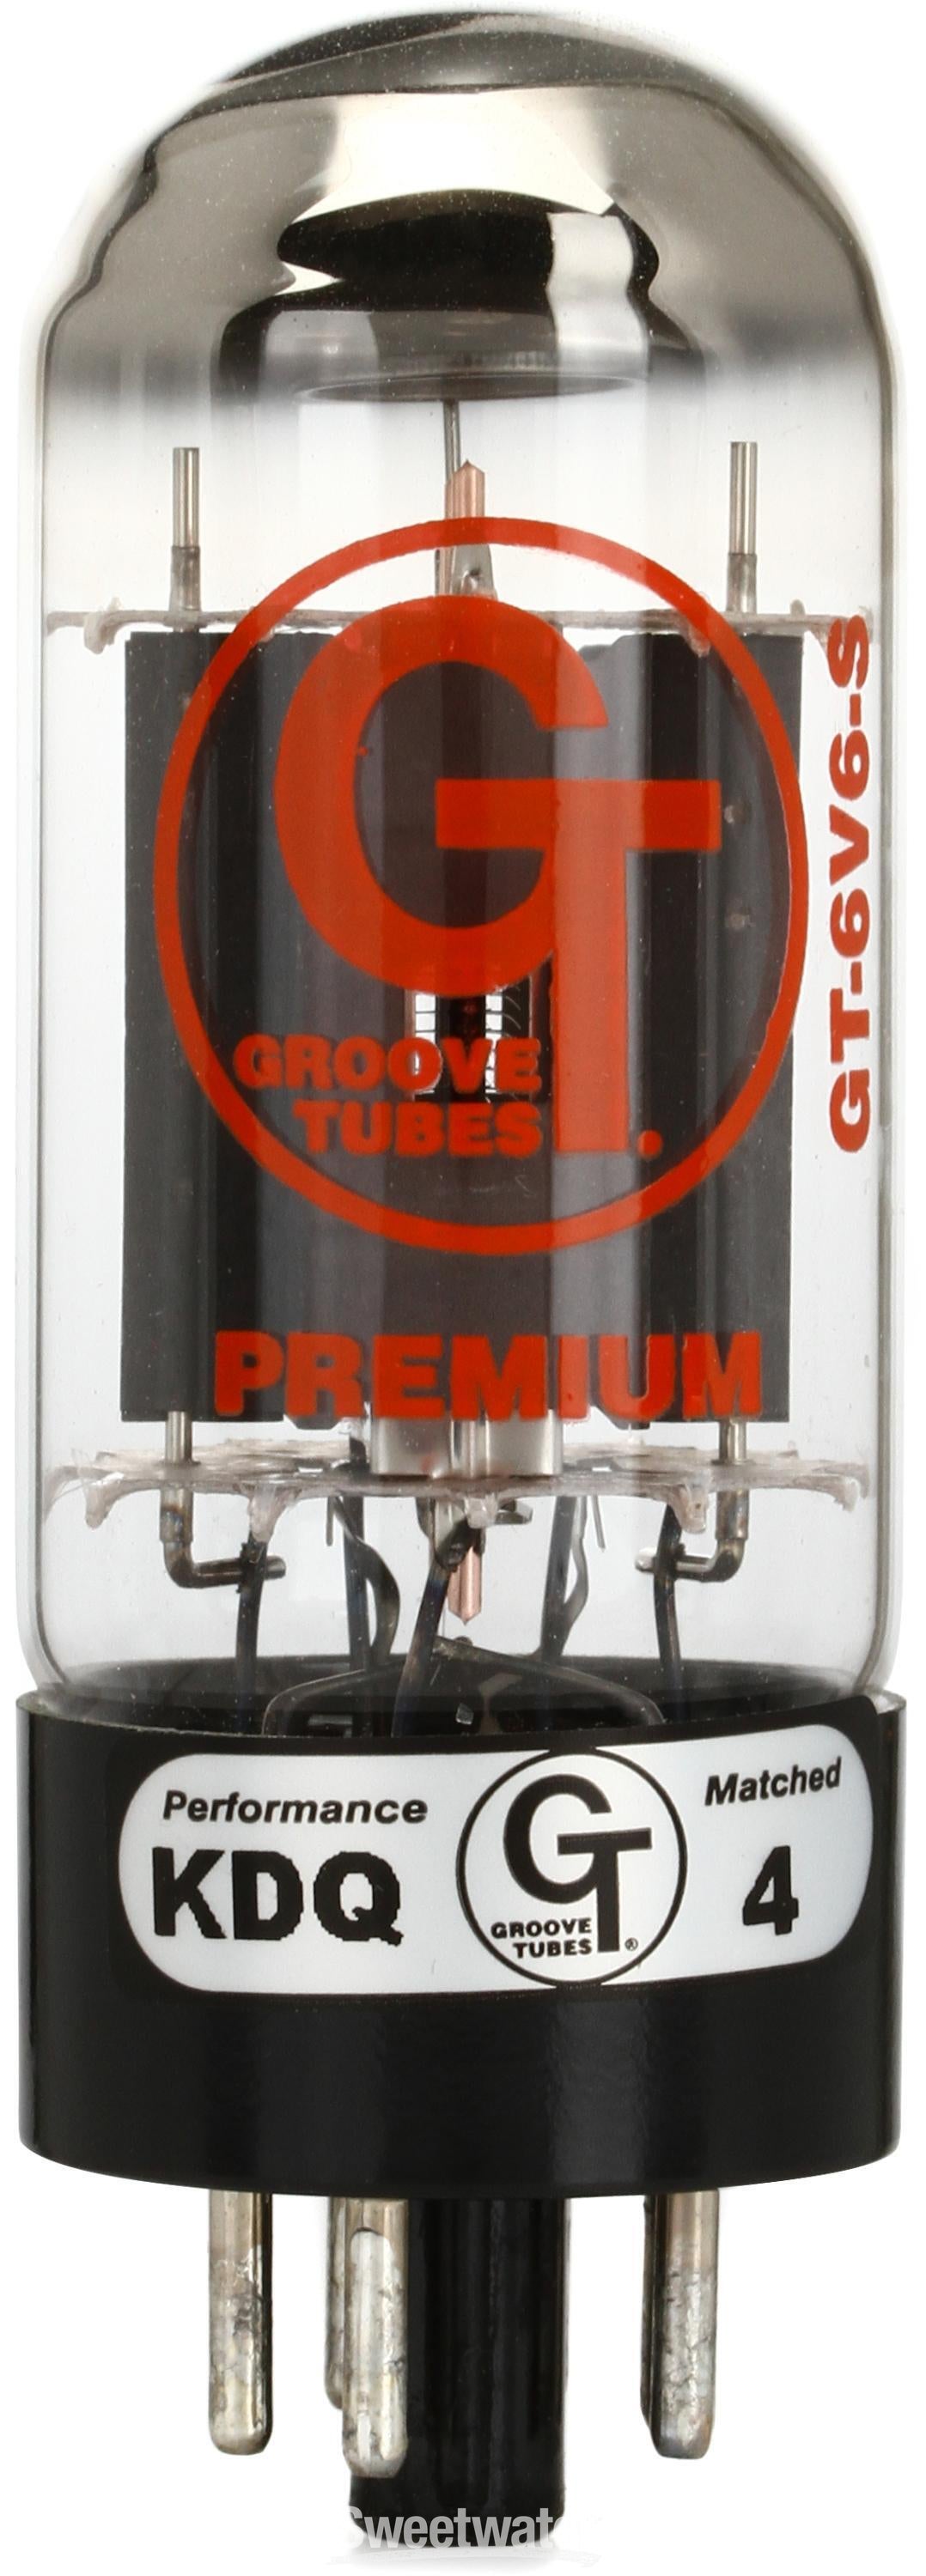 Groove Tubes GT-6V6S Select Power Tubes - Medium Duet | Sweetwater